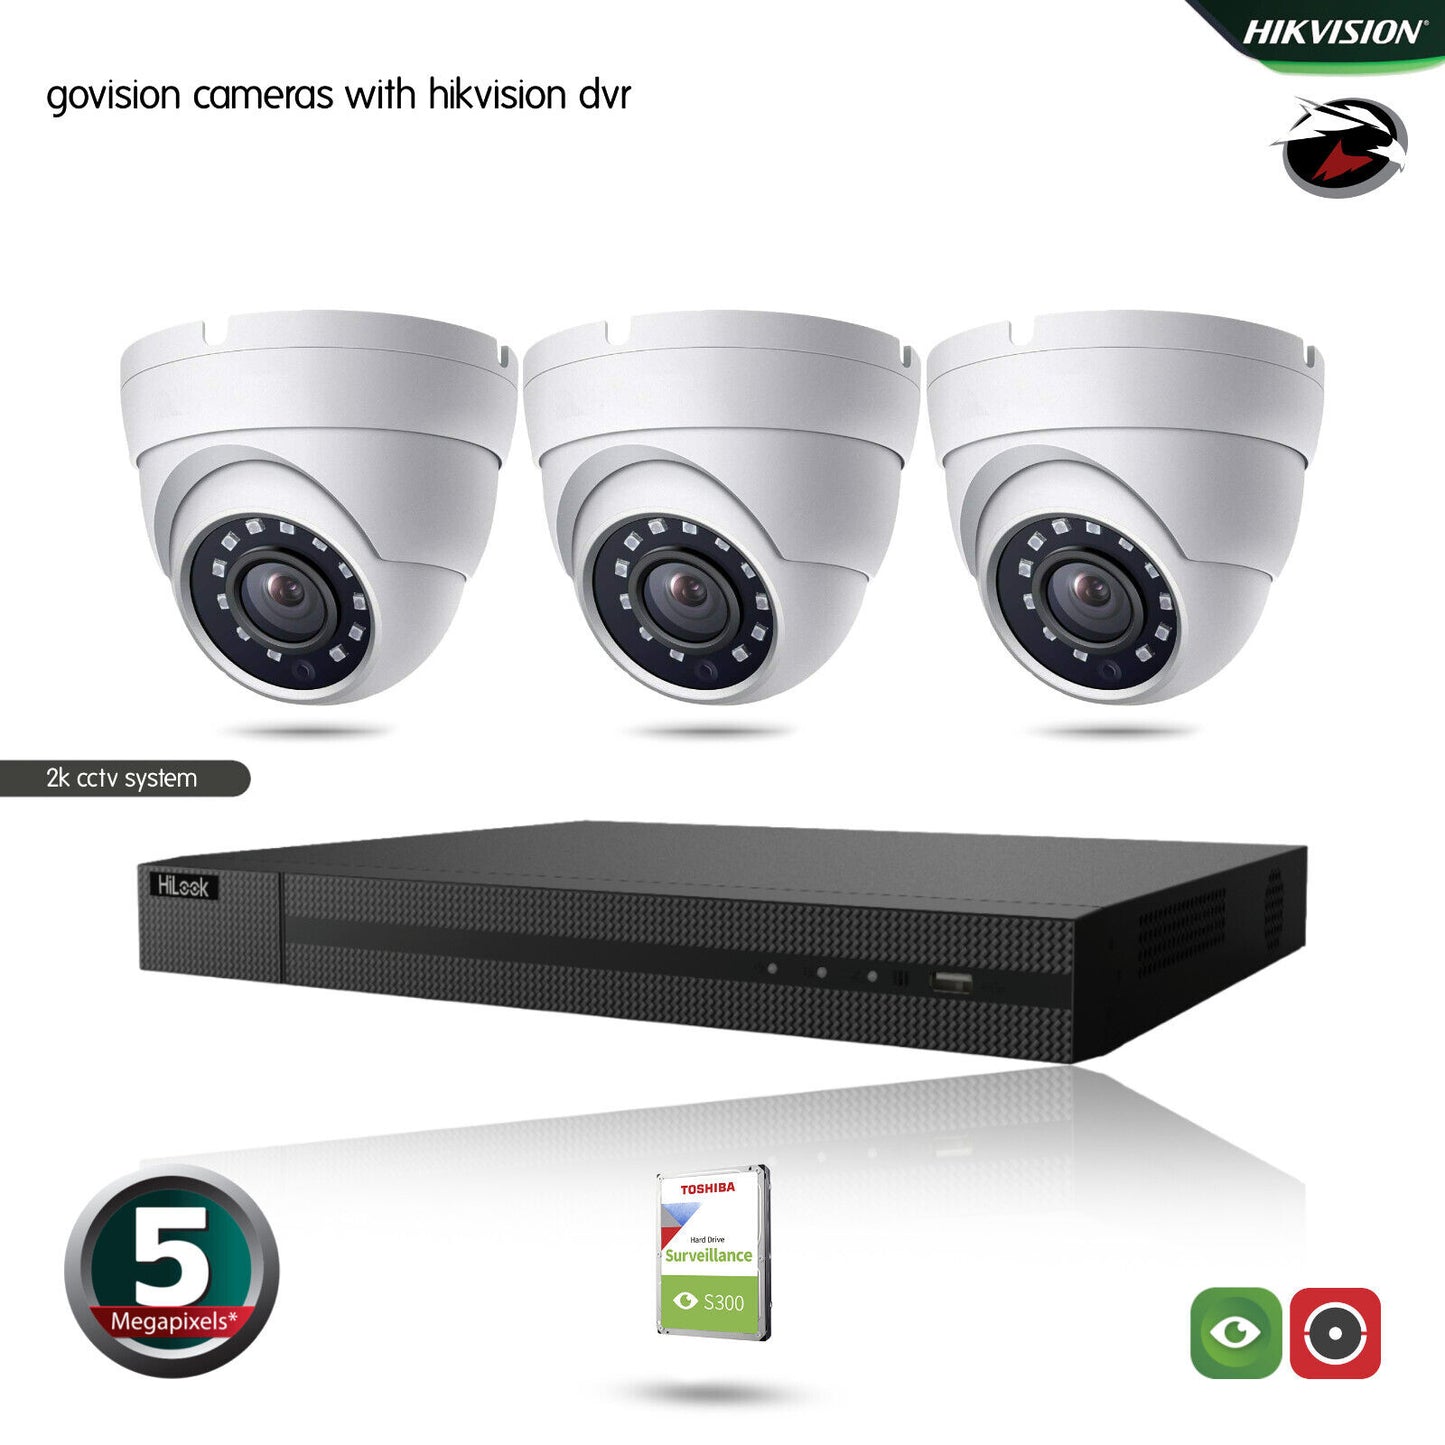 HIKVISION 5MP CCTV FULL HD NIGHT VISION OUTDOOR DVR HOME SECURITY SYSTEM KIT UK 4CH DVR 3xCameras (white) 1TB HDD